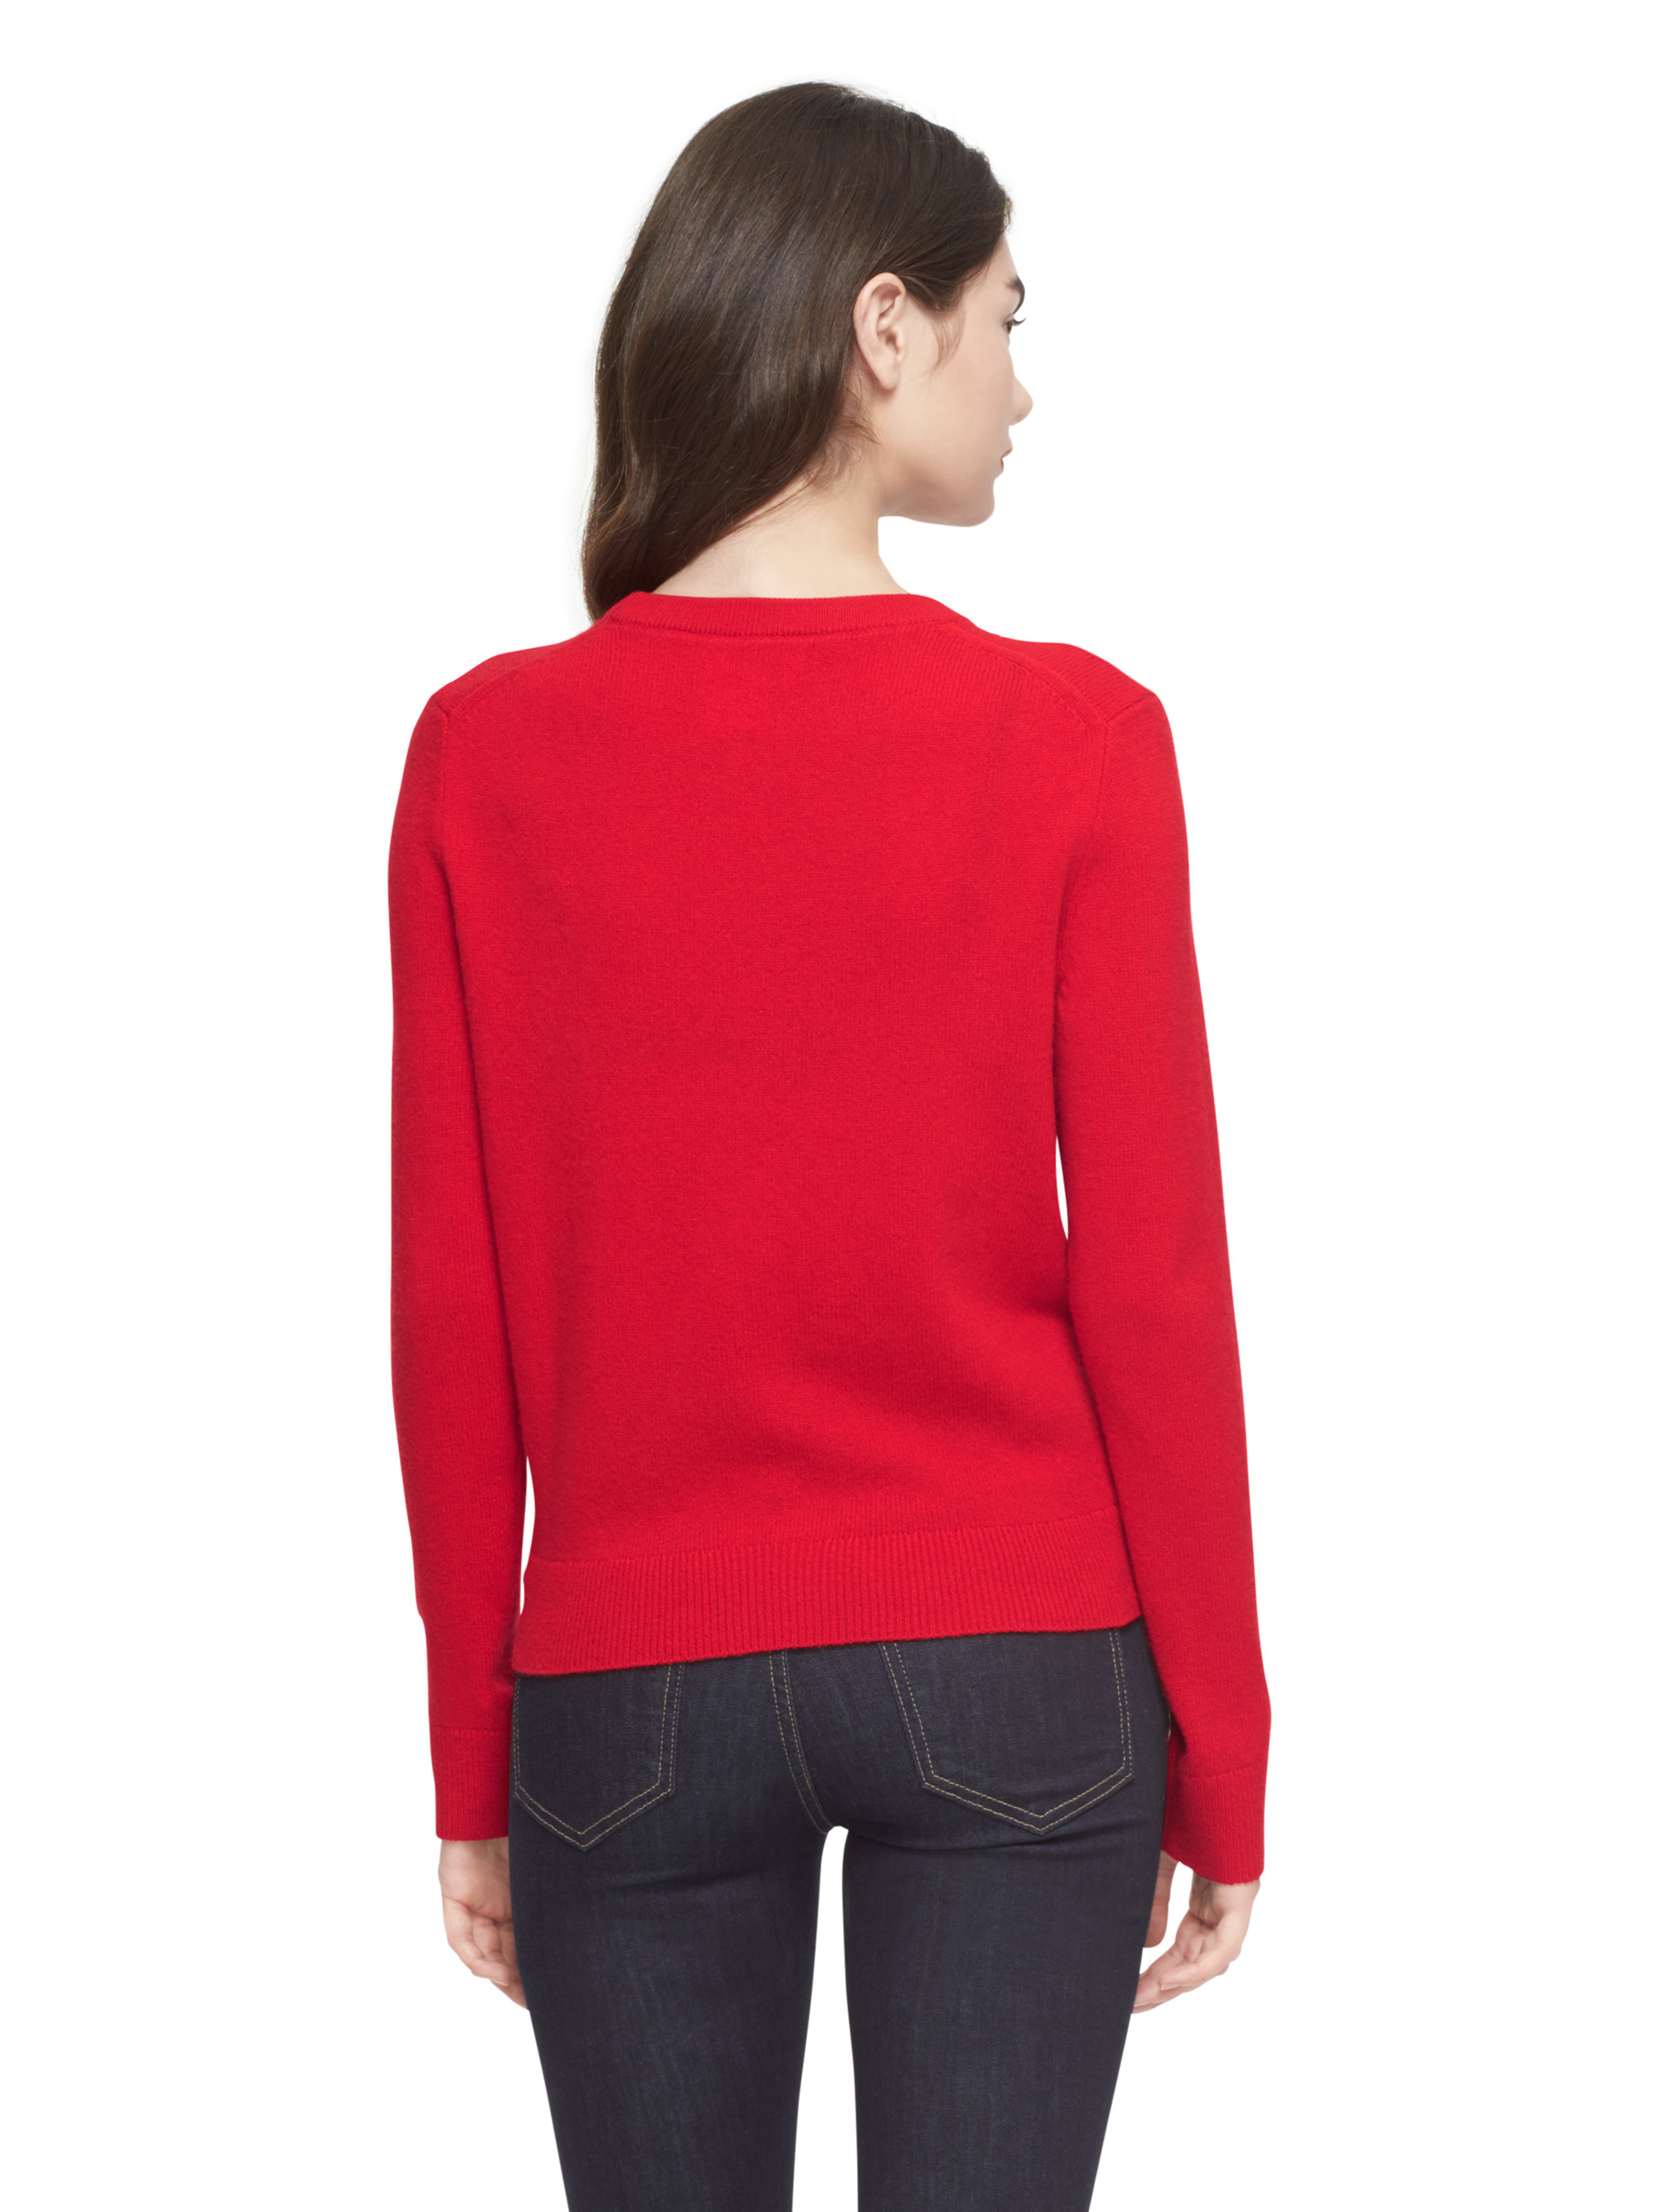 Kate spade new york Embellished Sweater in Red | Lyst